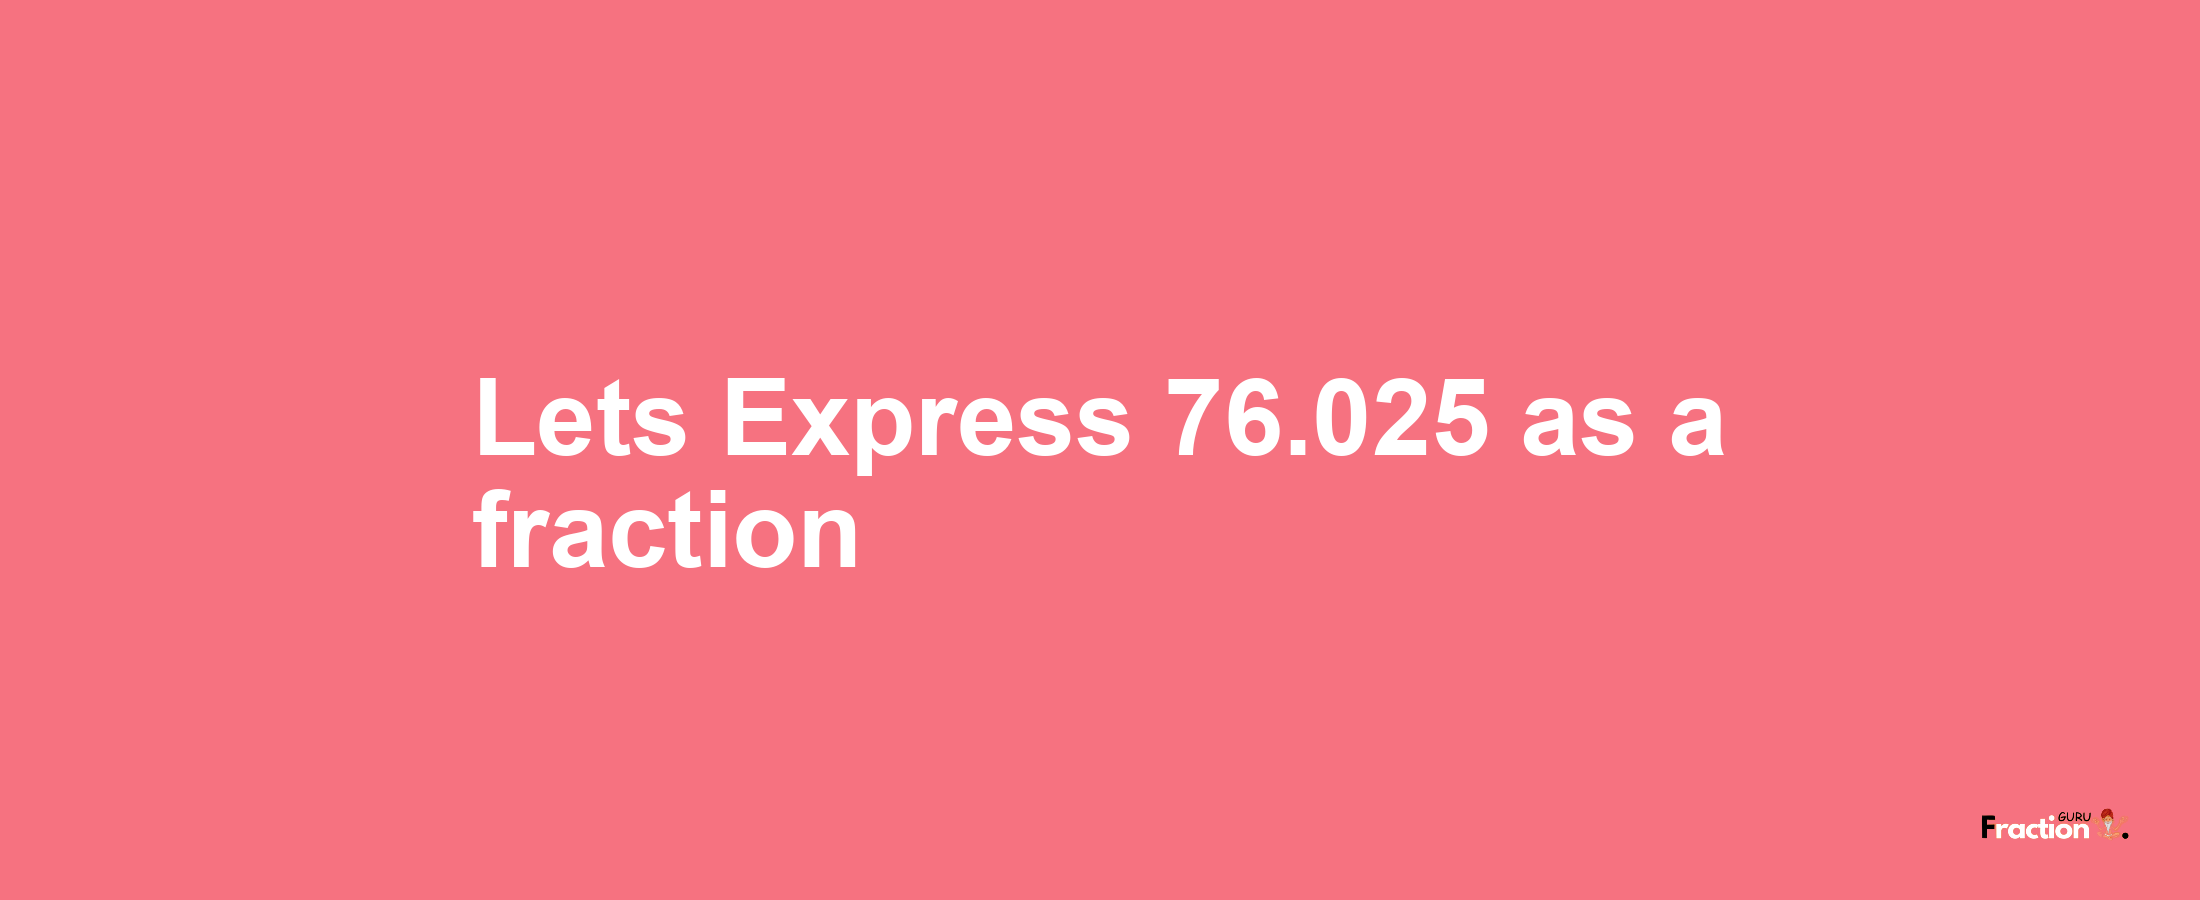 Lets Express 76.025 as afraction